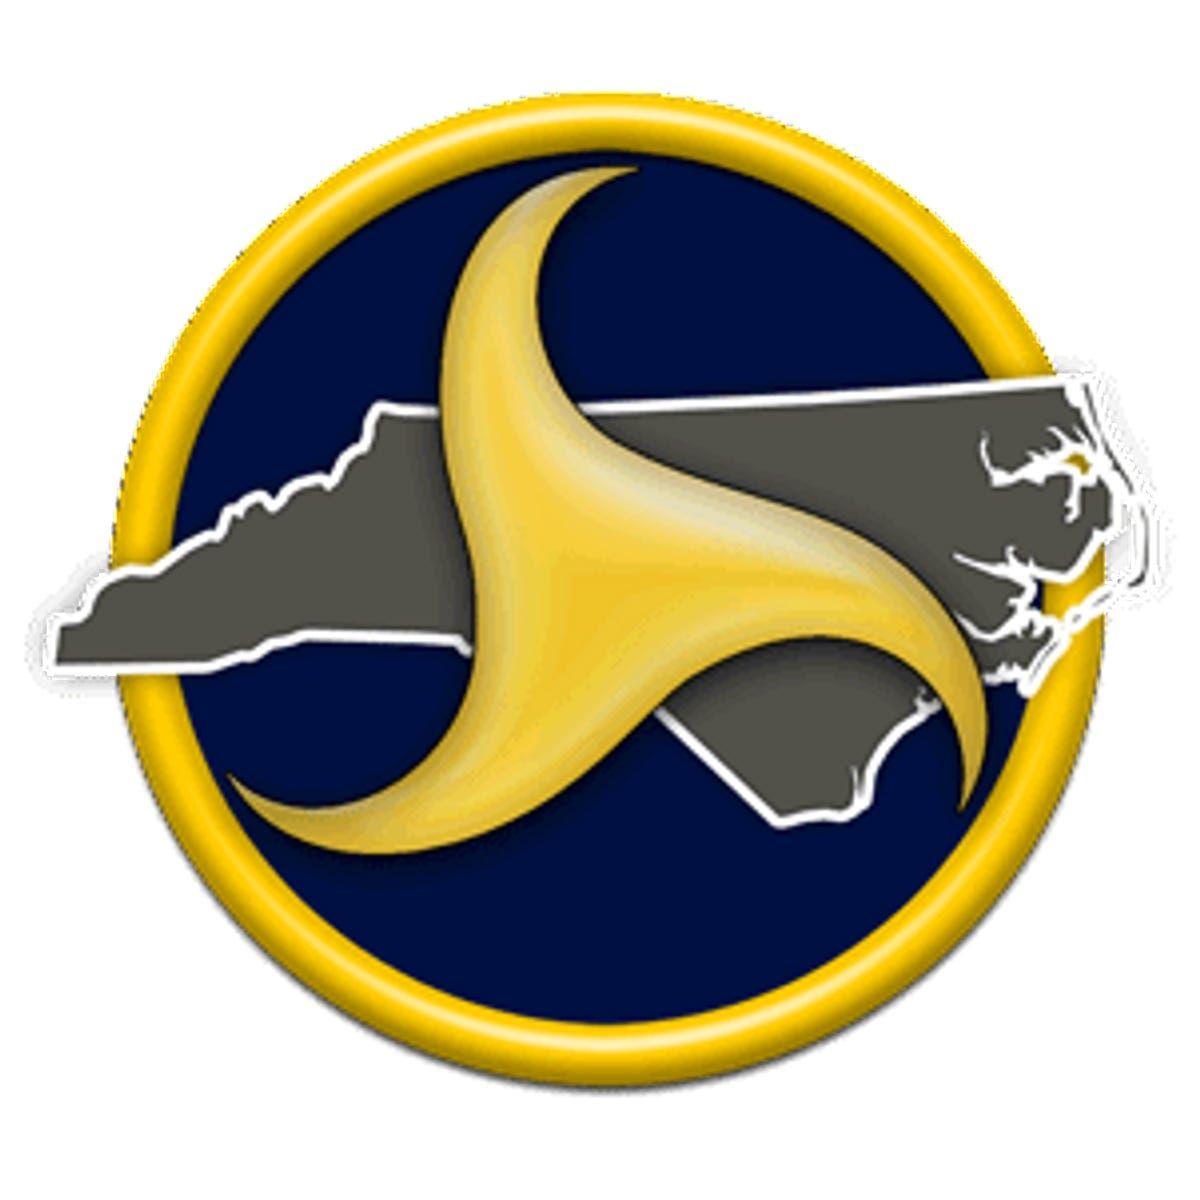 NCDOT Logo - NCDOT wants to know your top-priority transportation projects